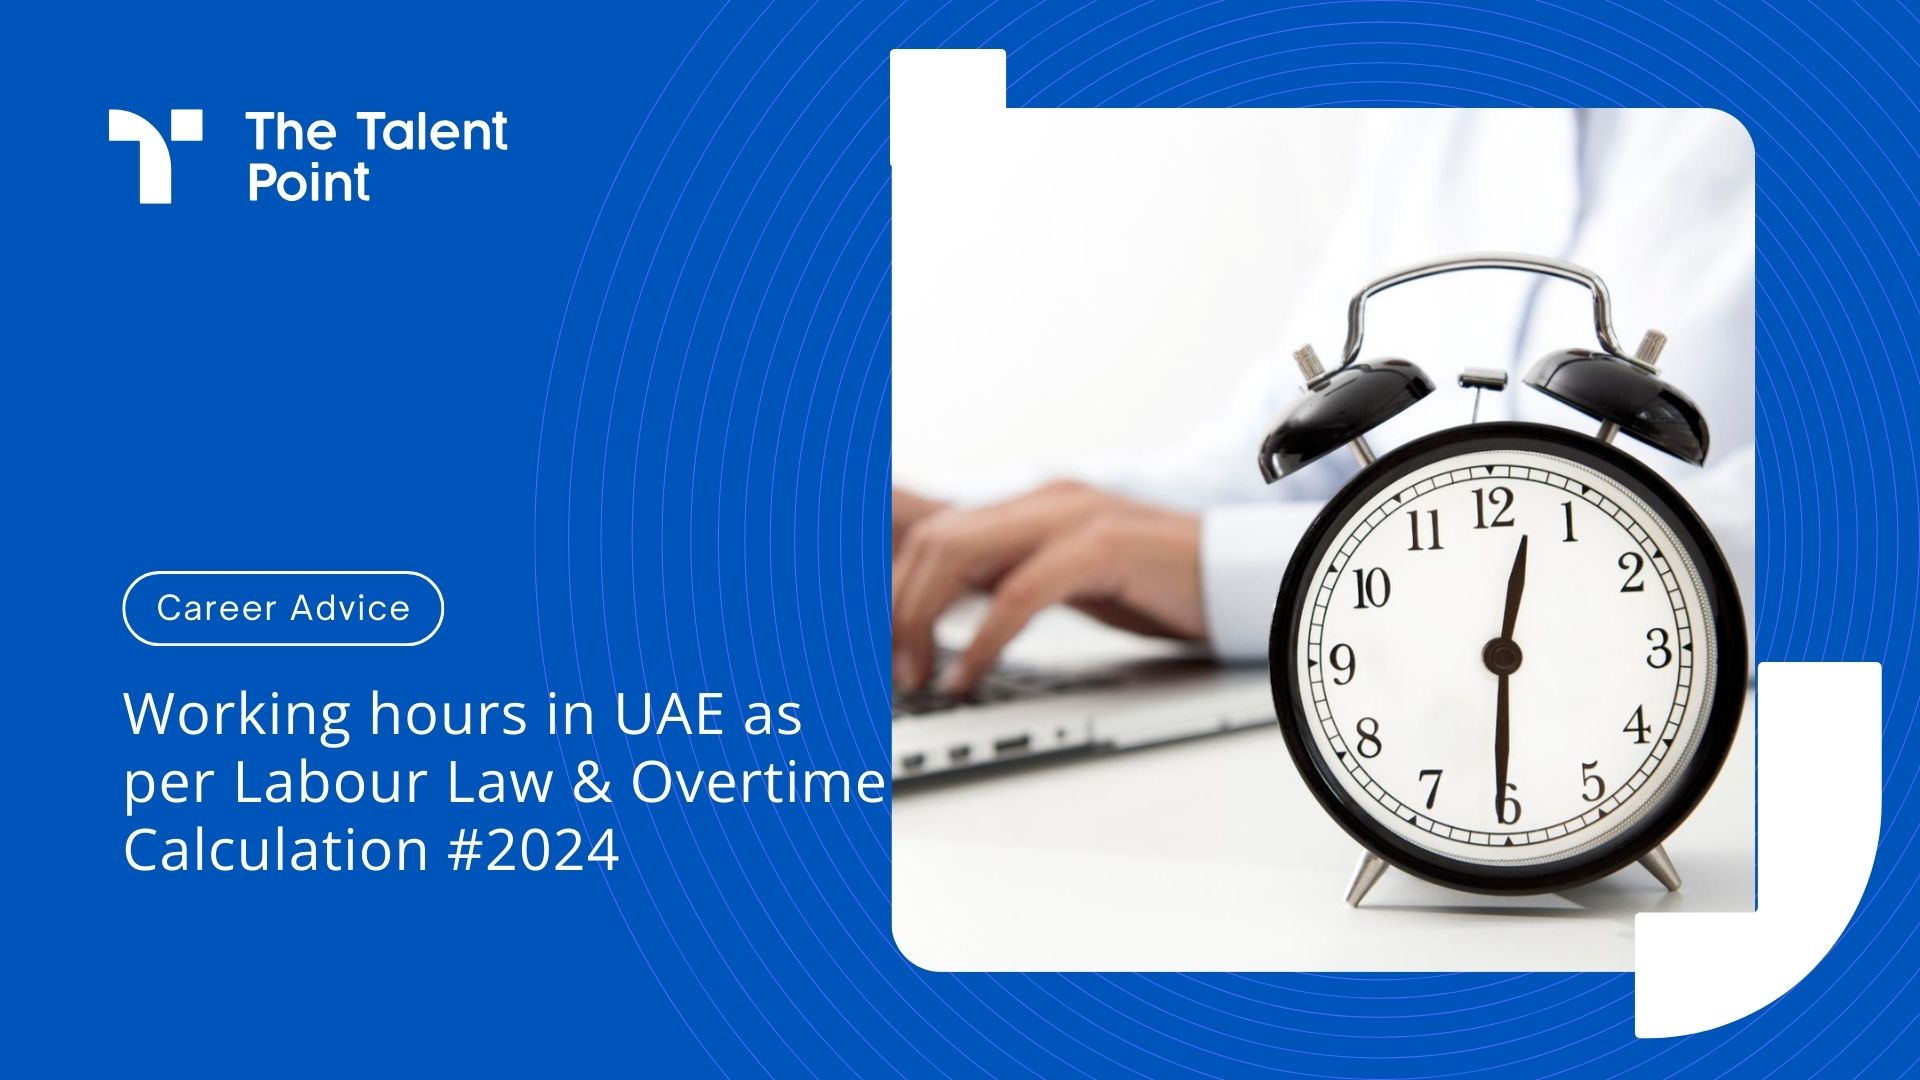 Working hours in UAE as per Labour Law & Overtime Calculation 2024